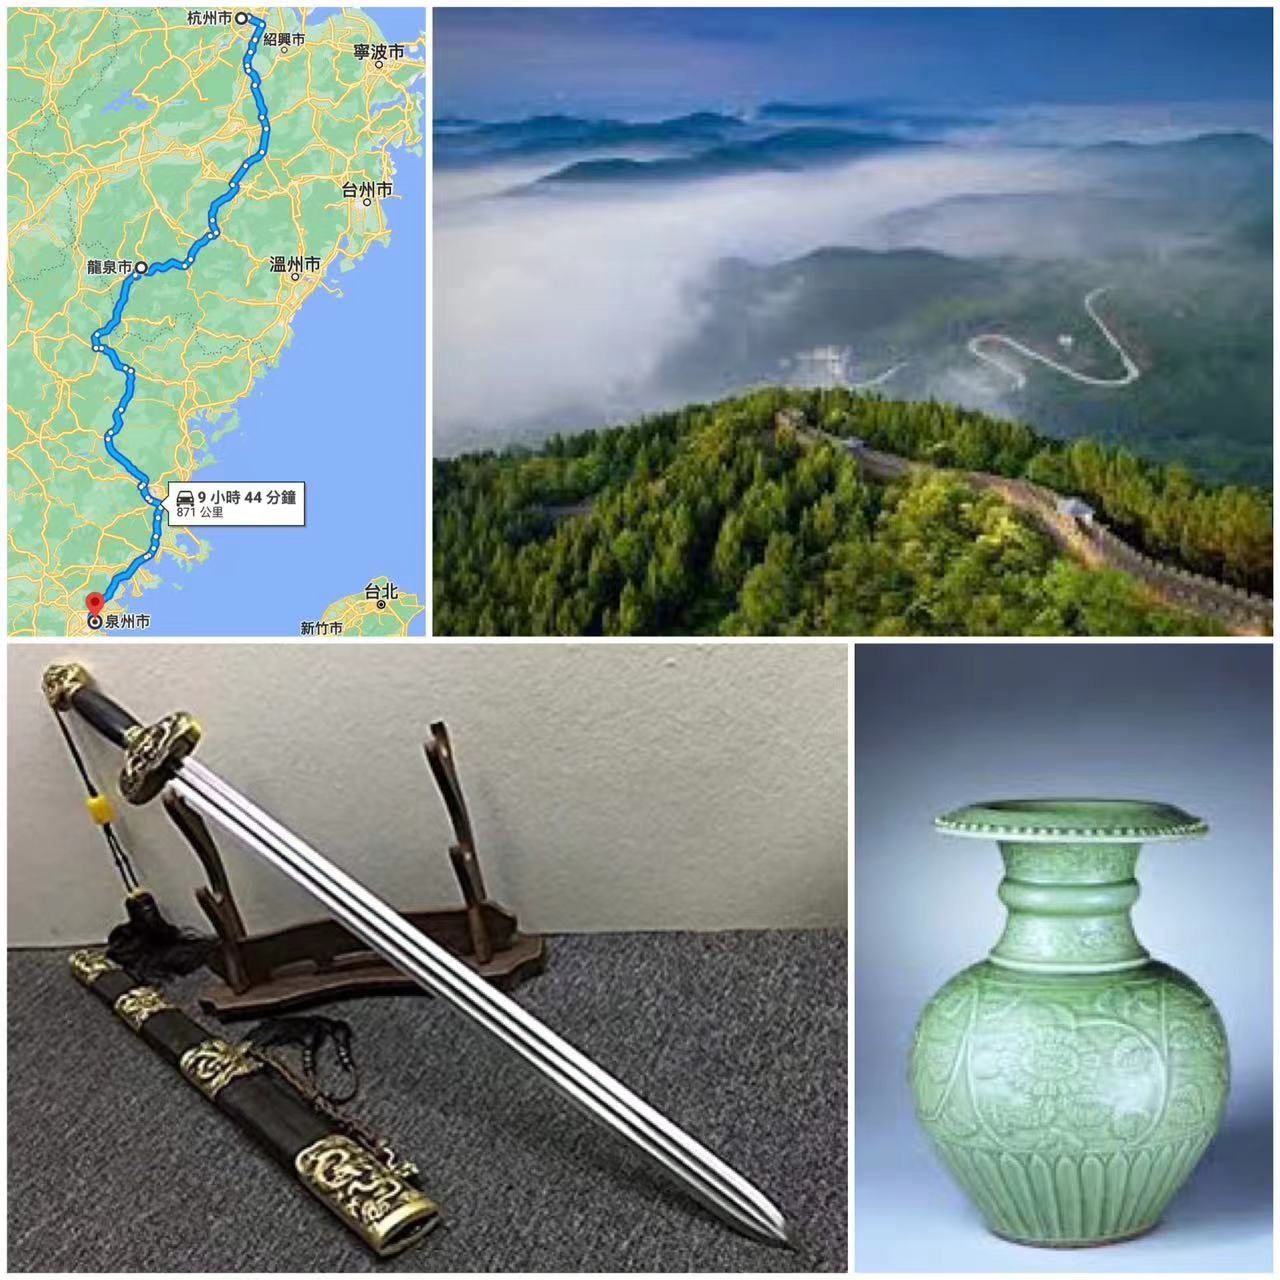 Chen Haoru's favourite place to visit in China: The road from 杭州 [Hángzhōu] to 泉州 [Quánzhōu], including locations like 龙泉 [Lóngquán] which is famous for swords and porcelain.